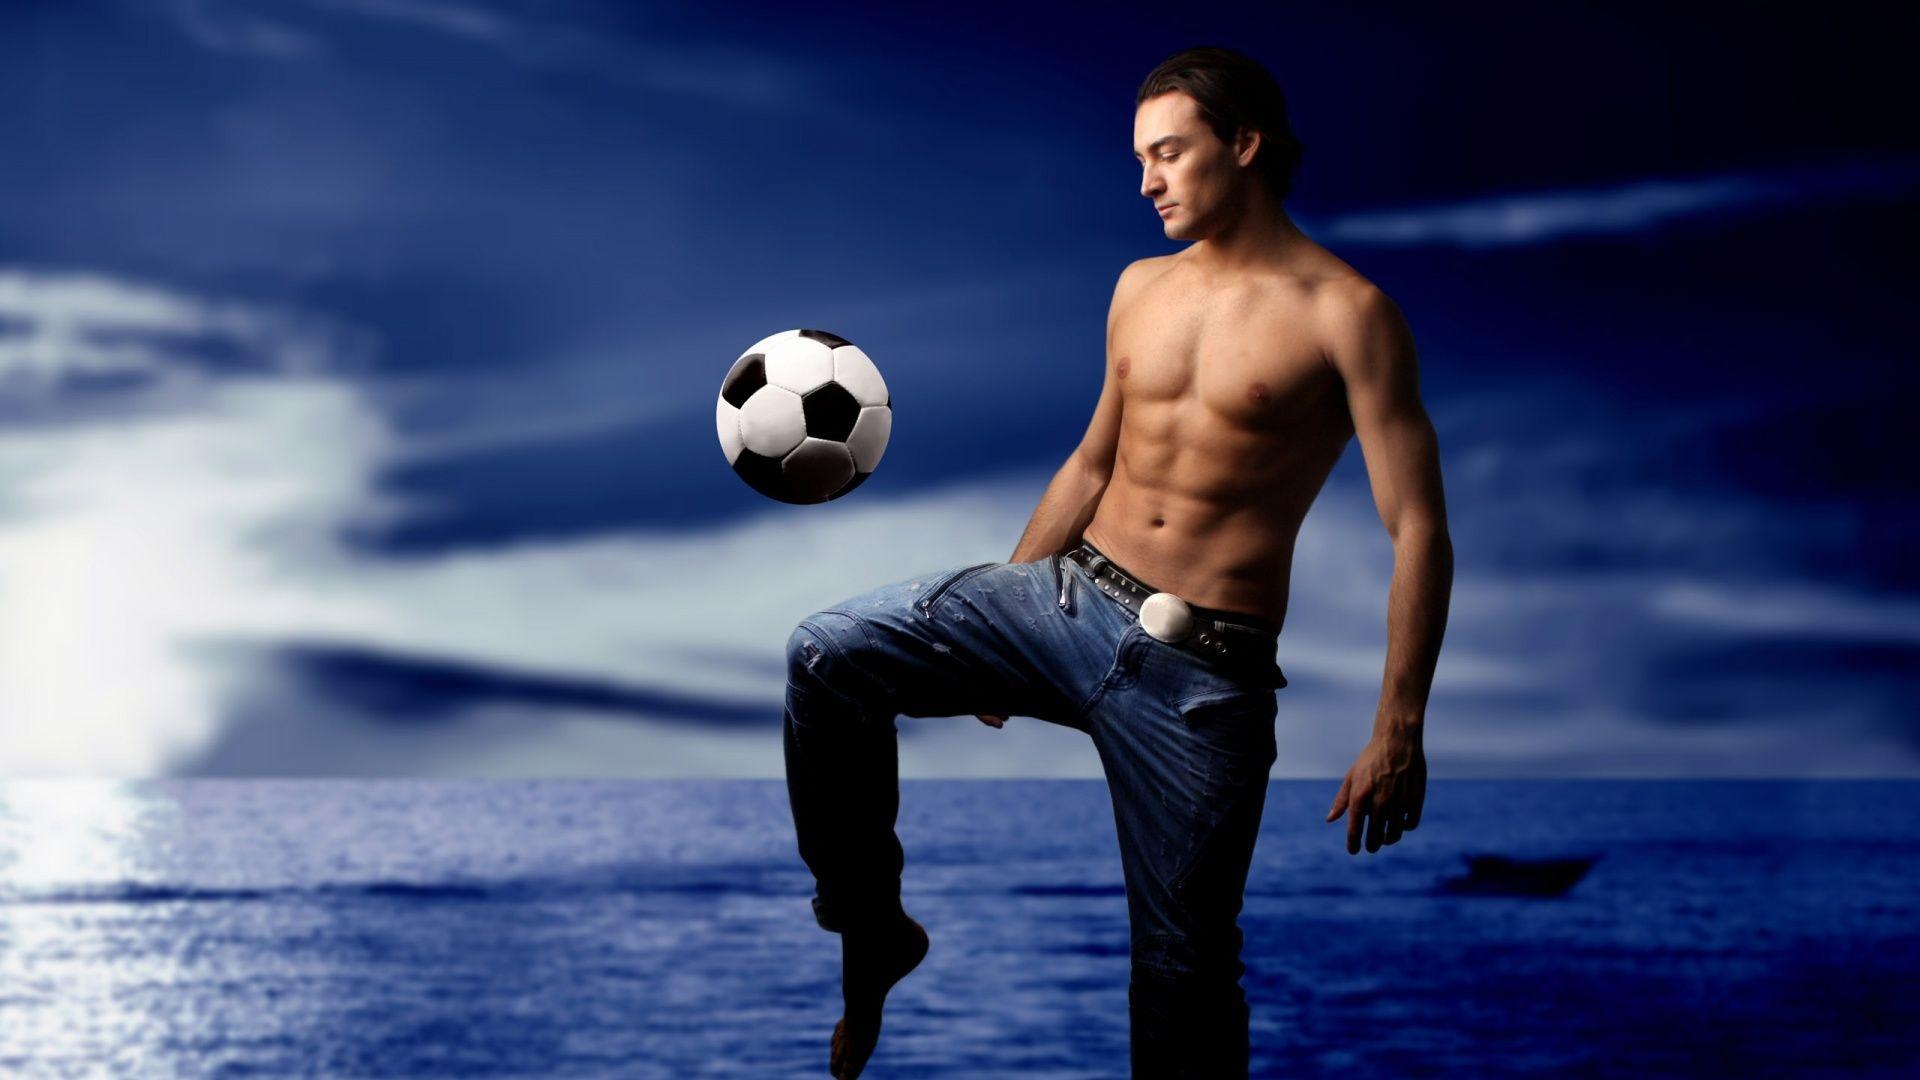 Football Player Modelling. Download HD Wallpaper